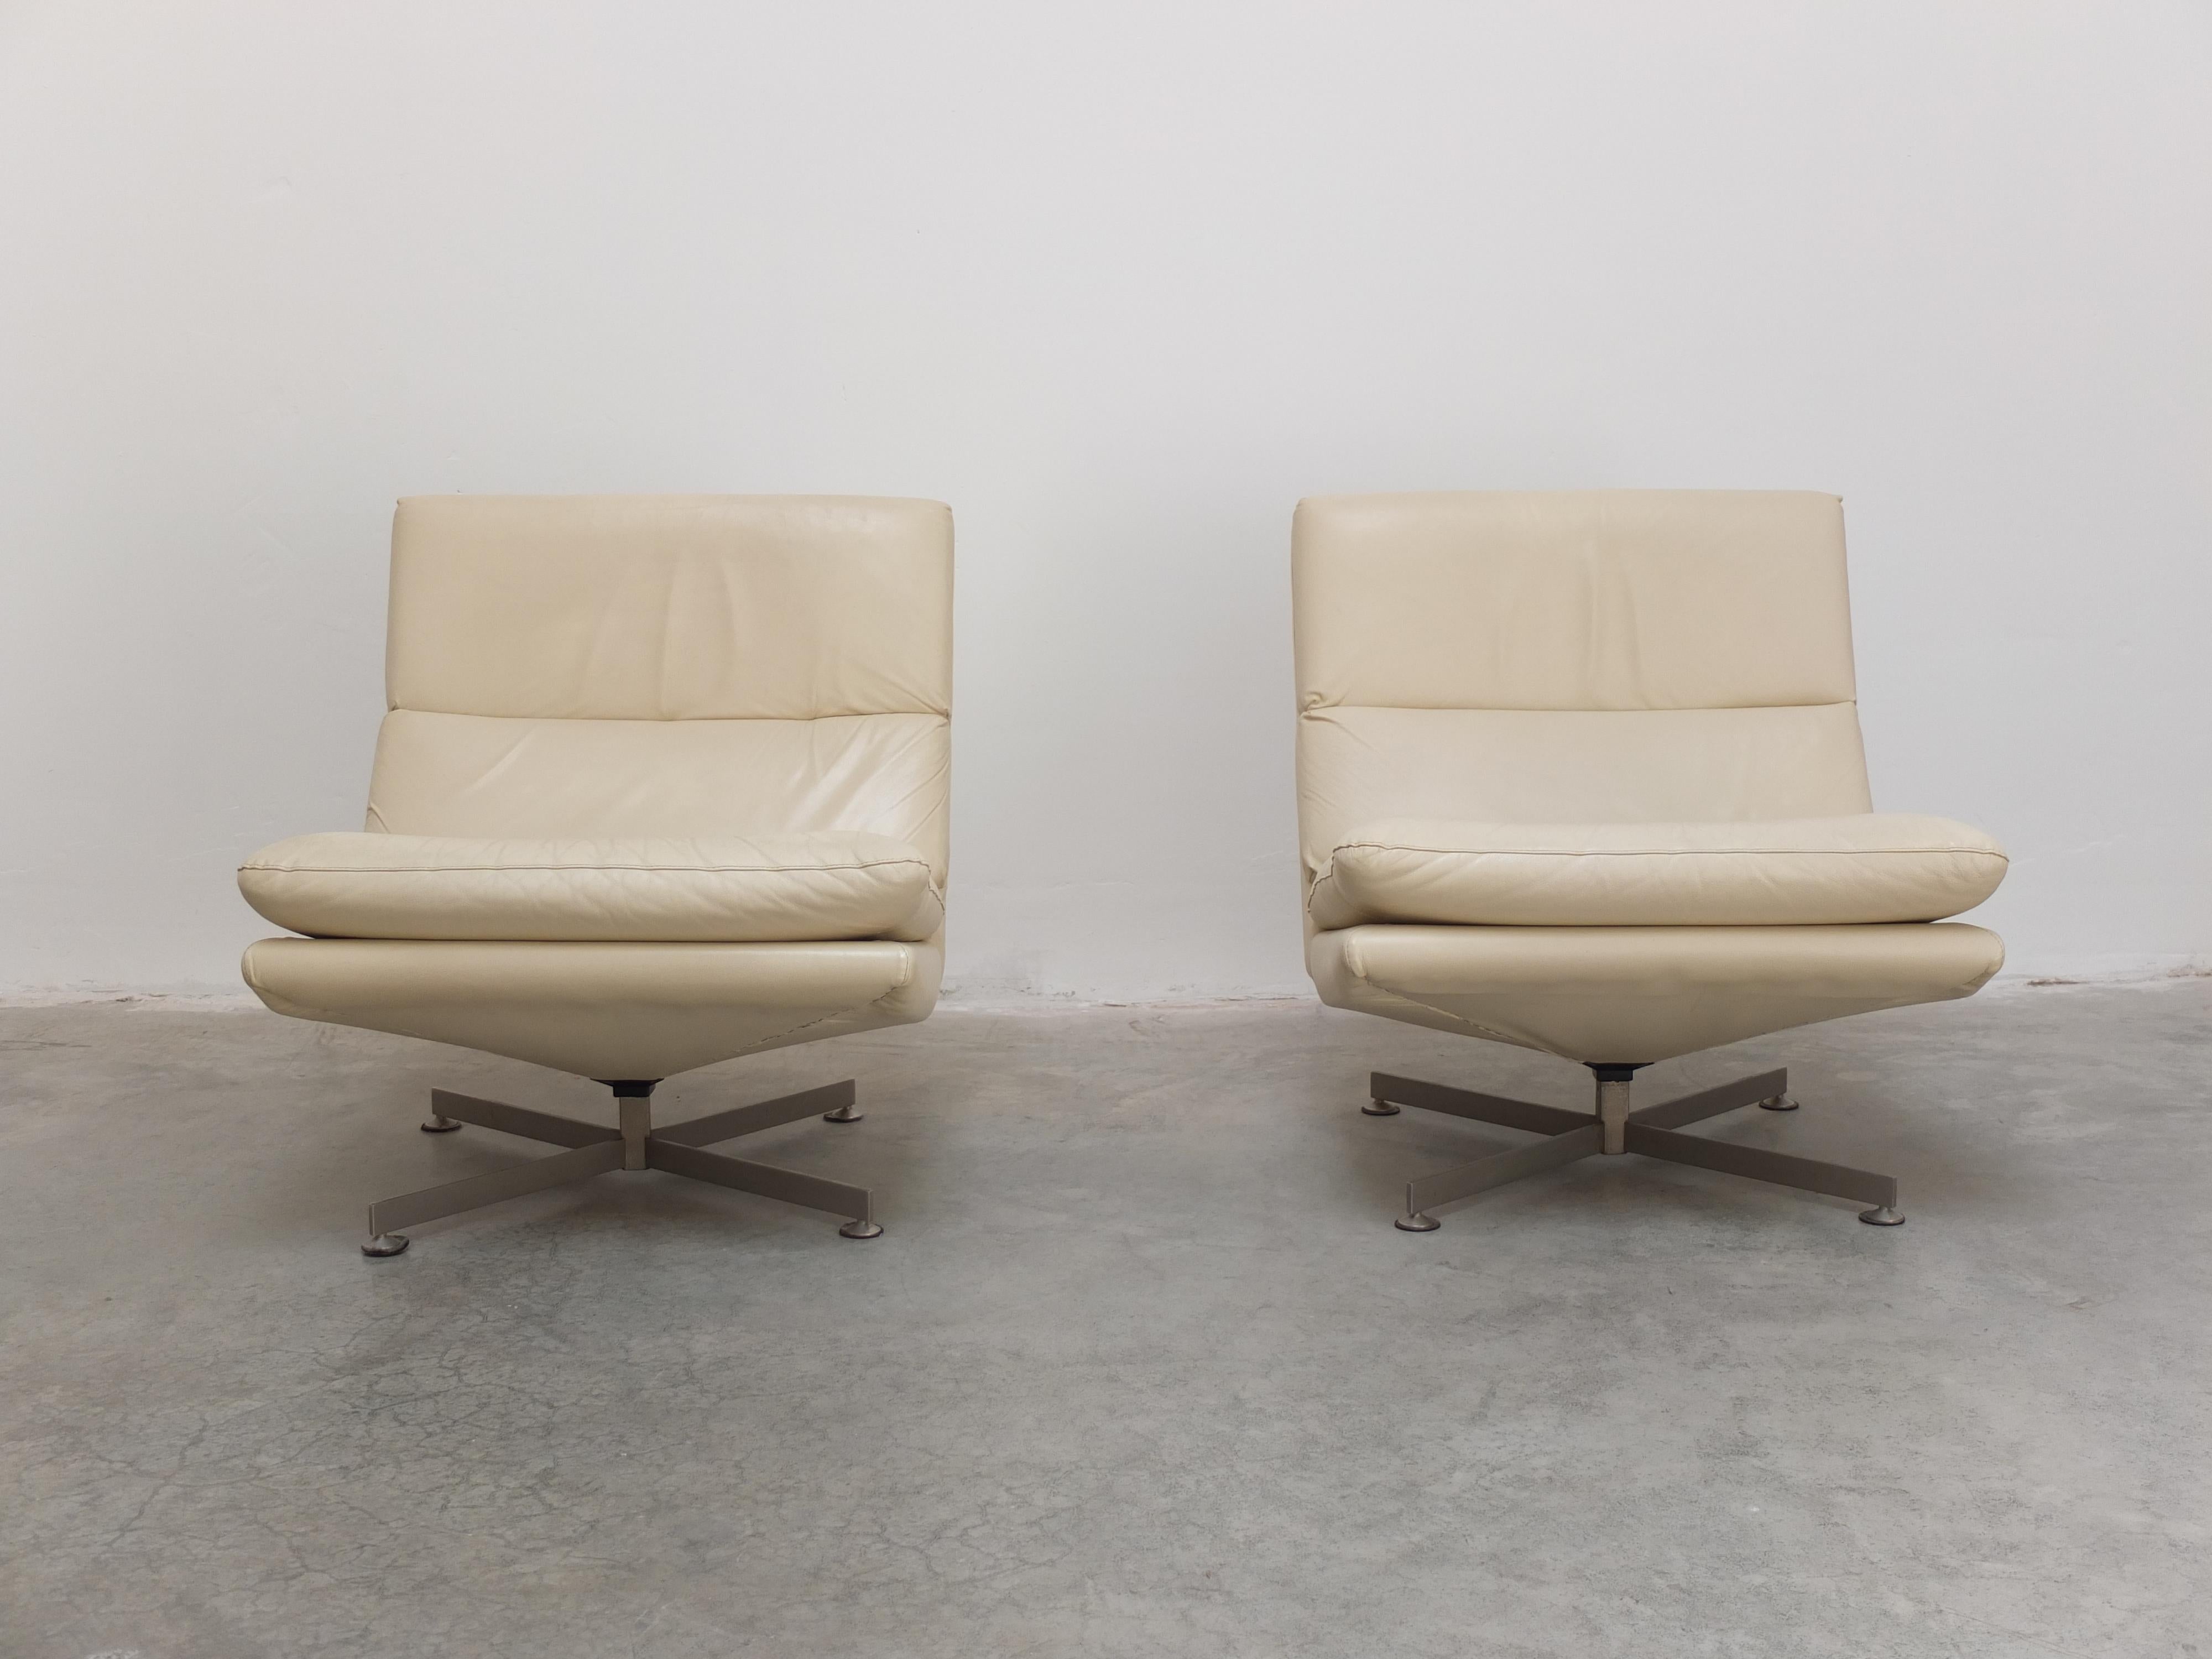 A rare pair of Belgian modernist lounge chairs designed by Georges Van Rijck for Beaufort during the 1960s. They feature a slim metal star-shaped base with a practical swivel function. All chairs are professionally reupholstered with a high quality